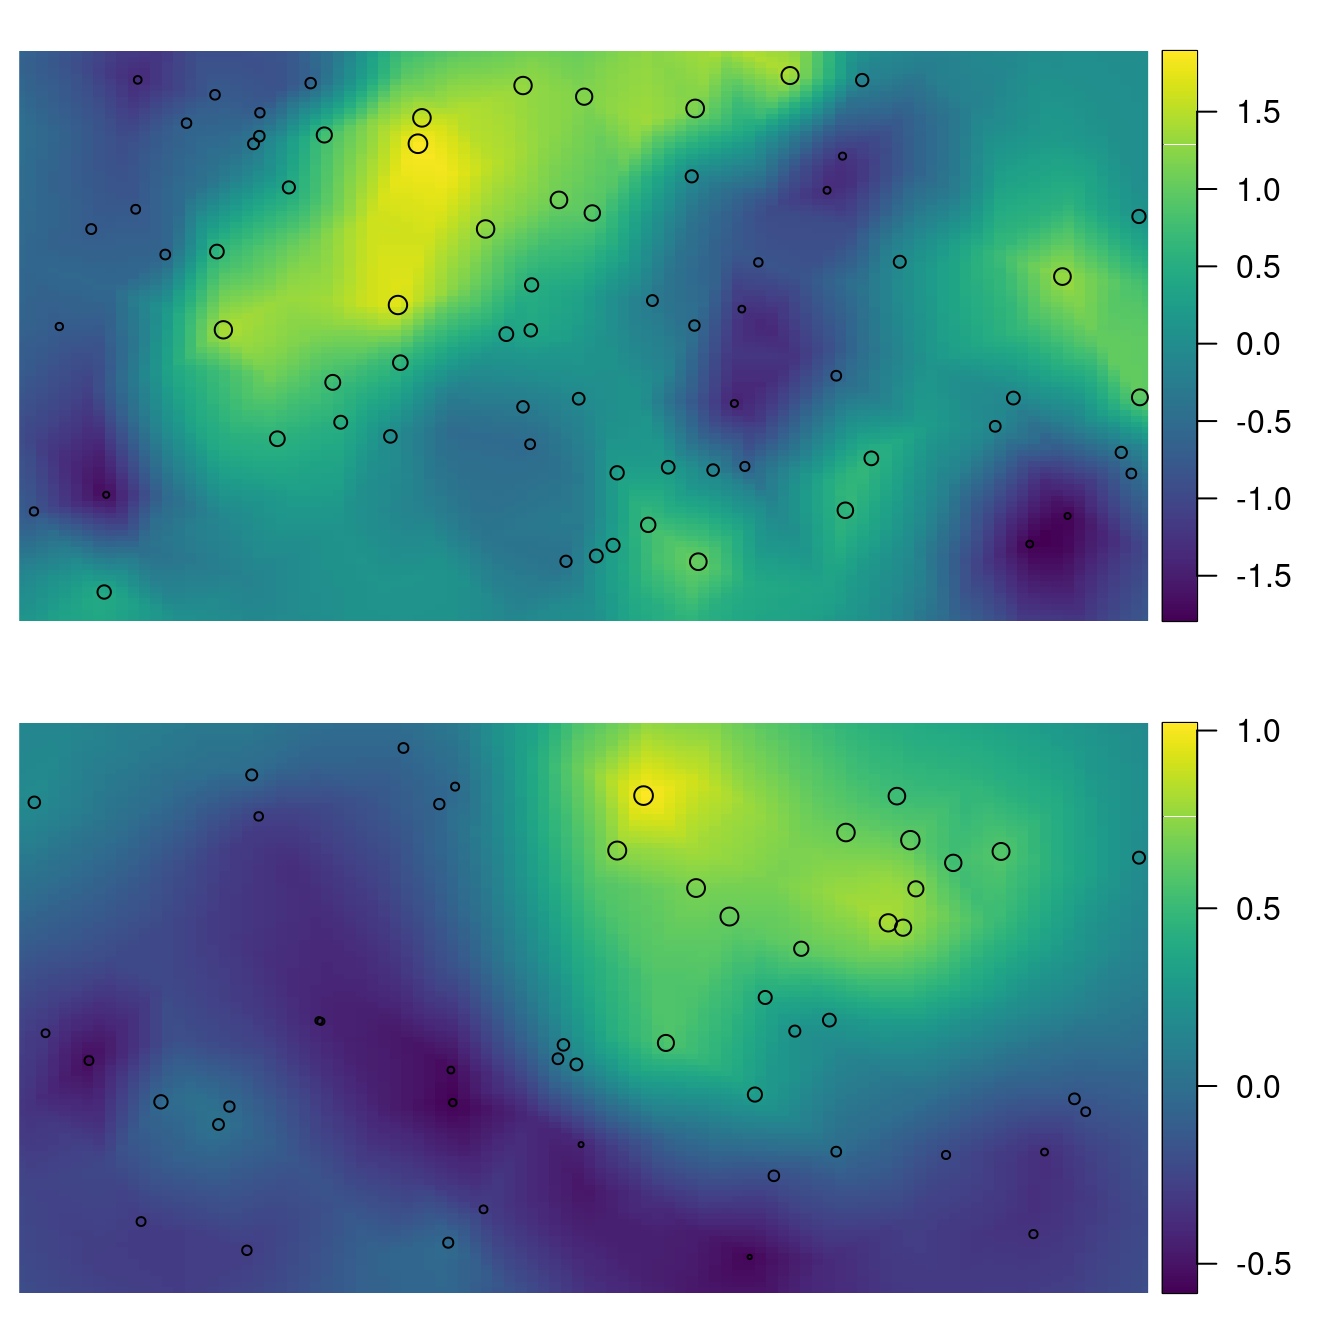 Posterior mean for \(\mathbf{m}\) and the \(\mathbf{x}\) locations plotted as points with size proportional to the simulated values for \(\mathbf{m}\) (top). Posterior mean for \(\mathbf{v}\) and the \(\mathbf{y}\) locations plotted as points with size proportional to the simulated values for \(\mathbf{v}\) (bottom).